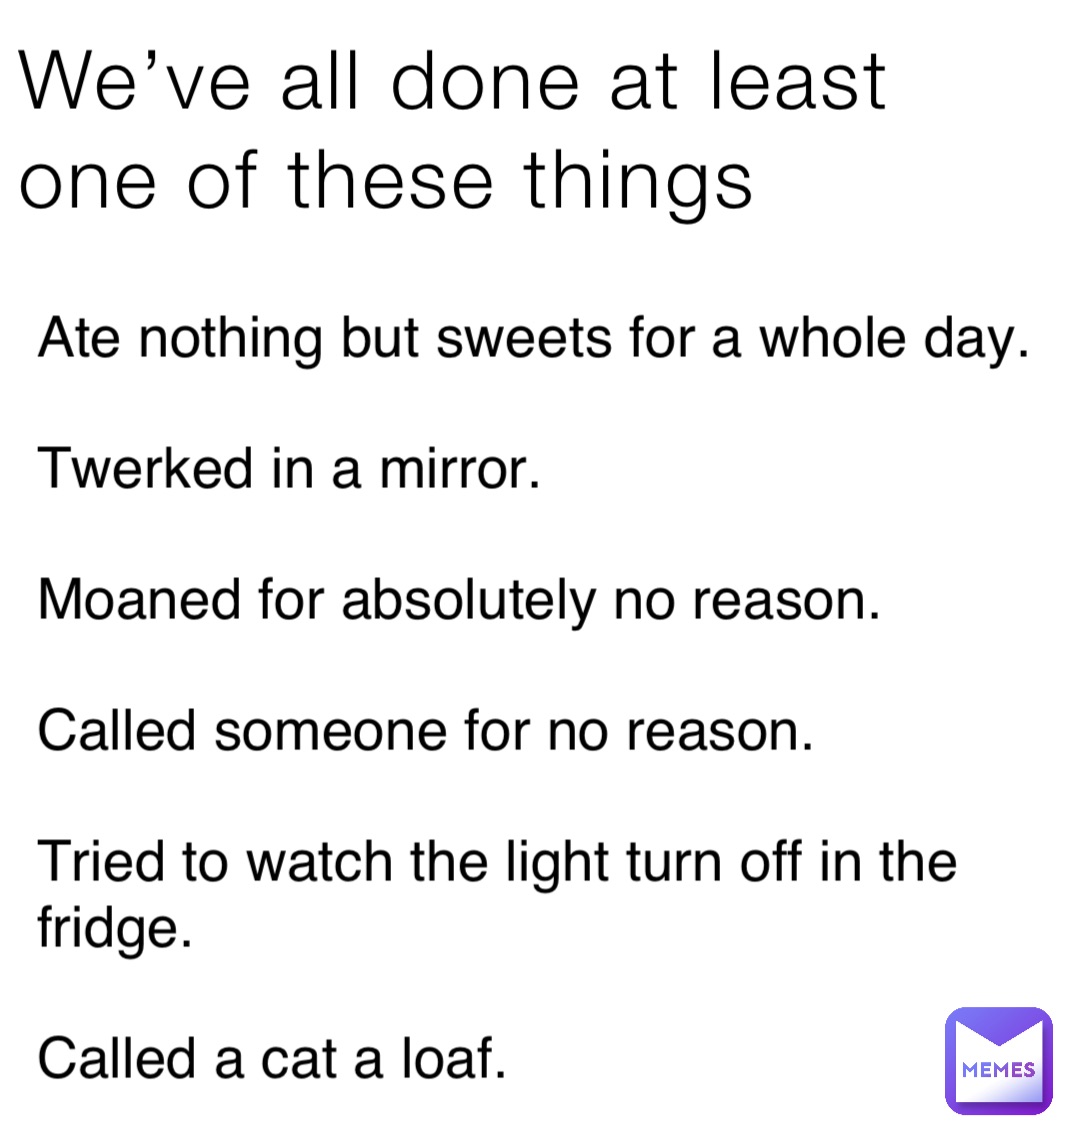 We’ve all done at least one of these things Ate nothing but sweets for a whole day.

Twerked in a mirror.

Moaned for absolutely no reason.

Called someone for no reason.

Tried to watch the light turn off in the fridge.

Called a cat a loaf.